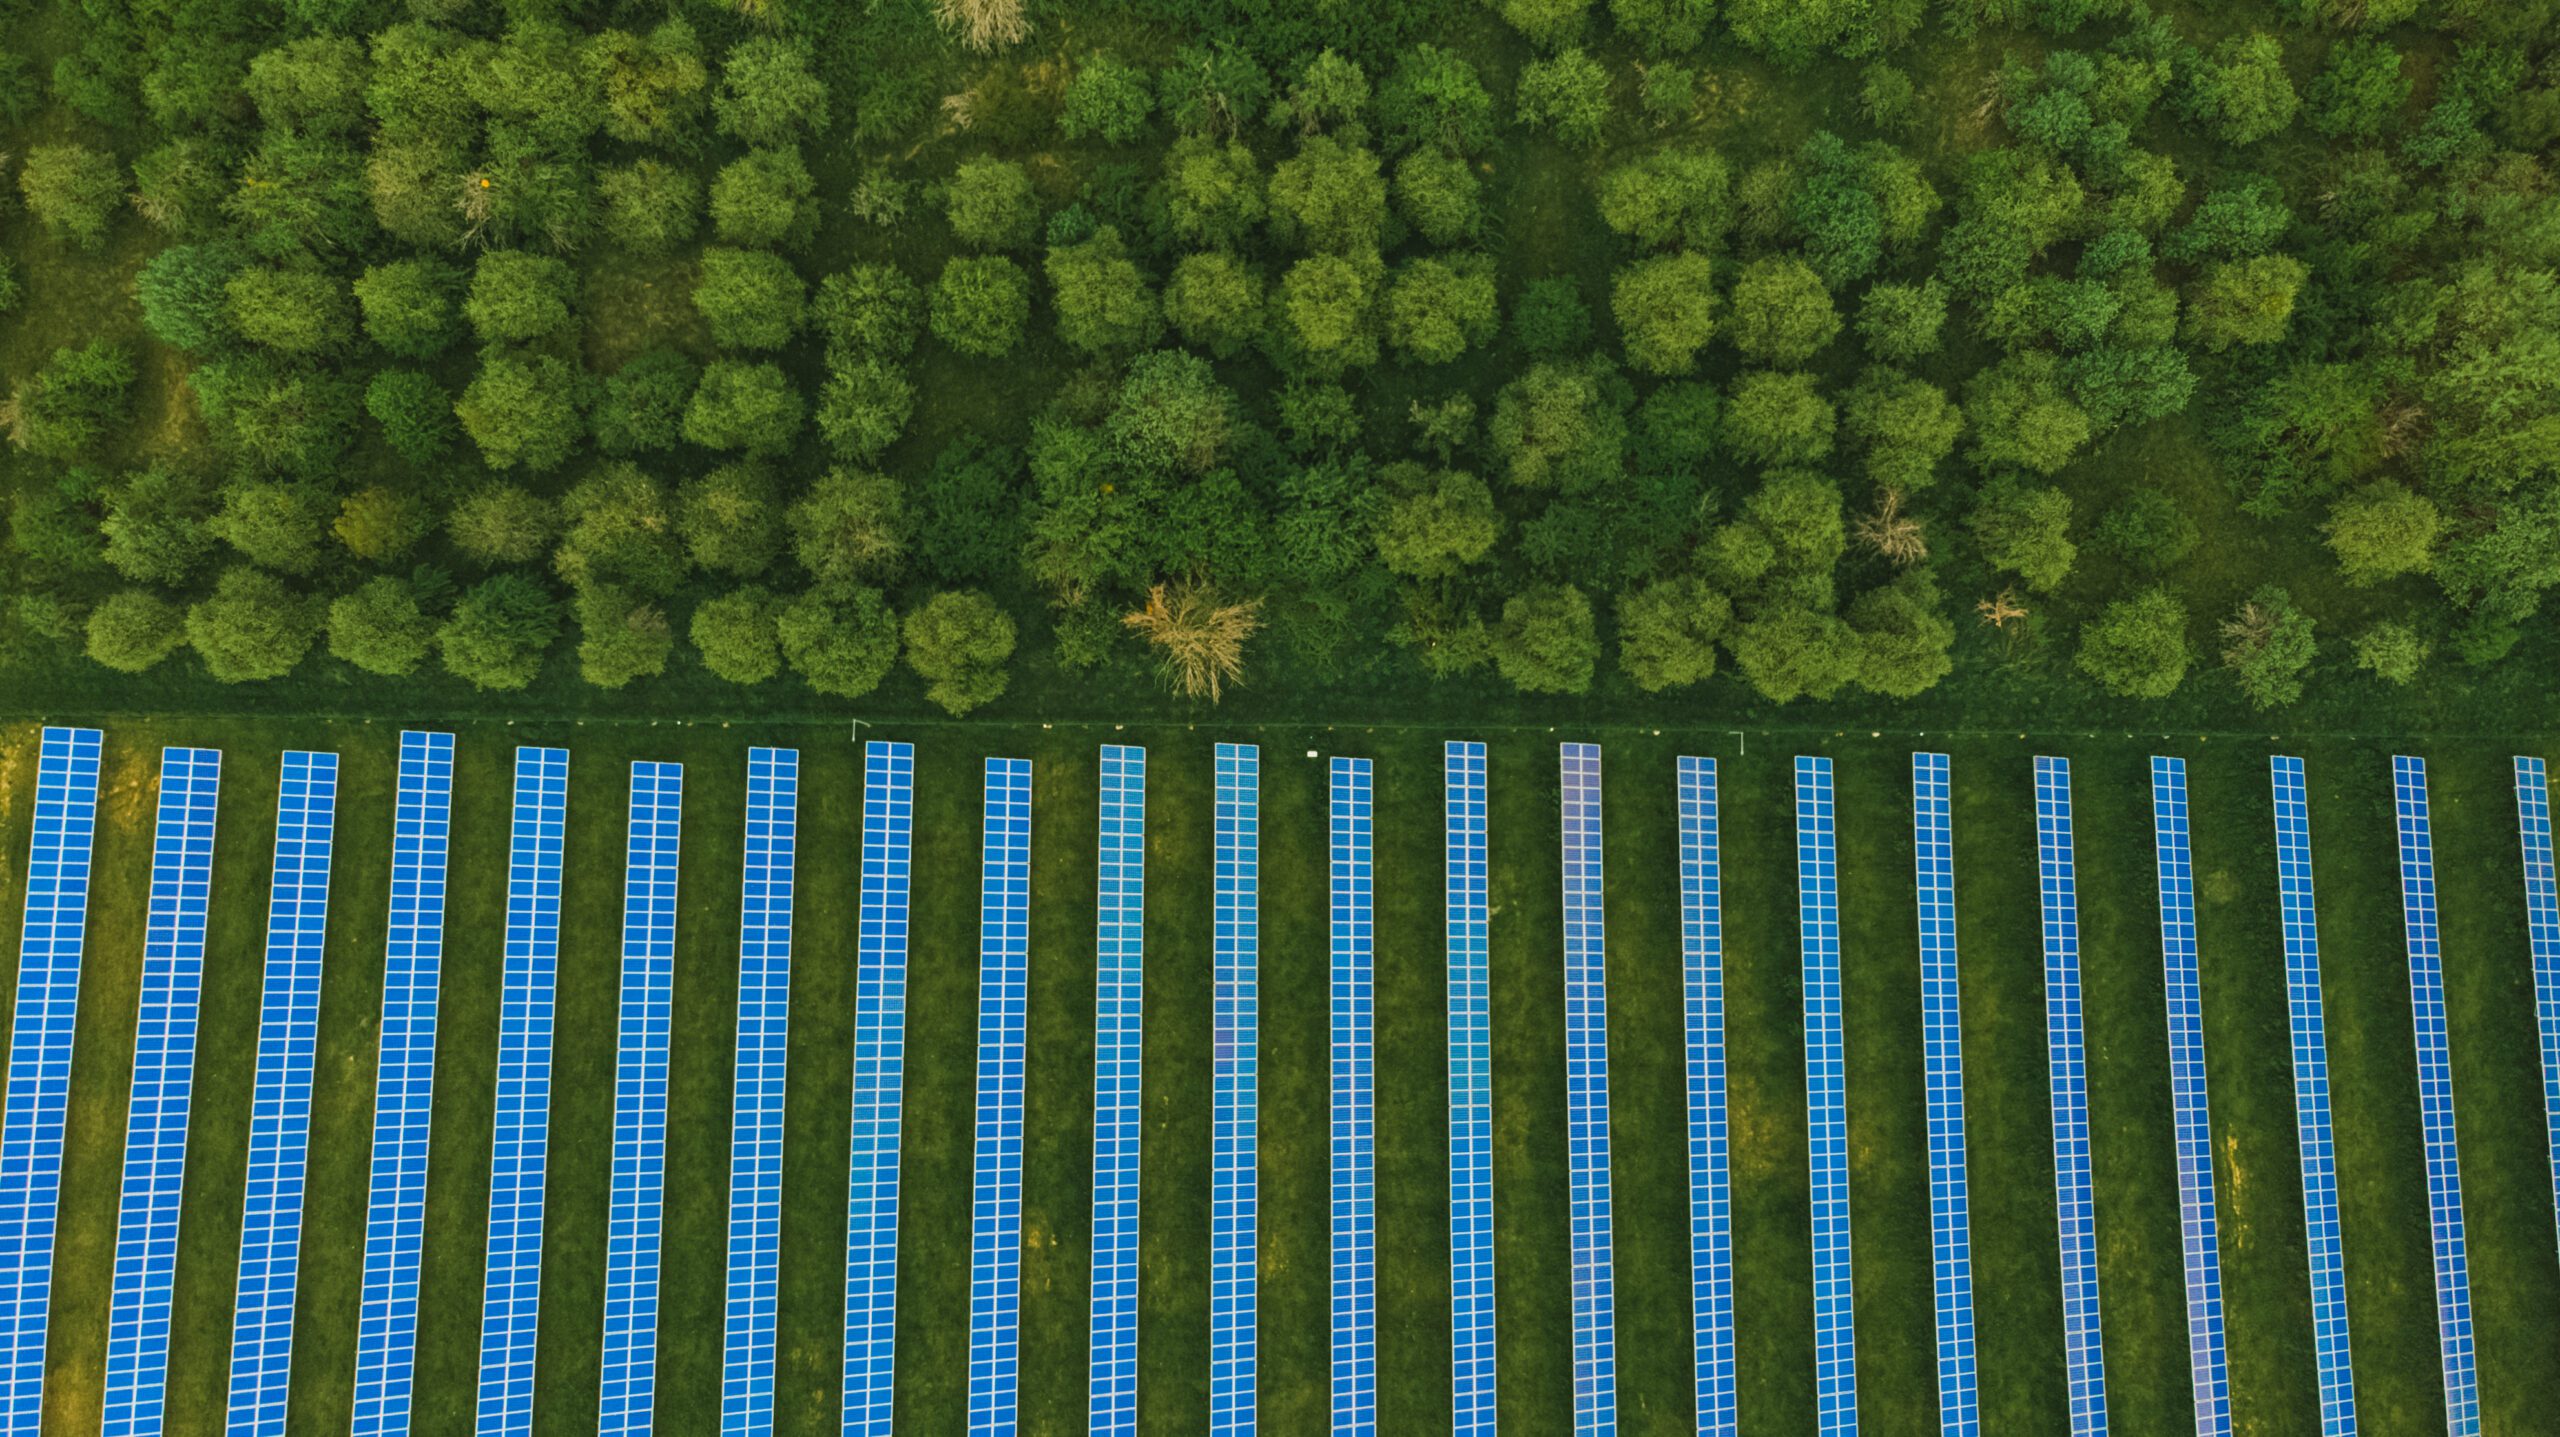 Top view of solar panels (solar cell) in solar farm with green trees